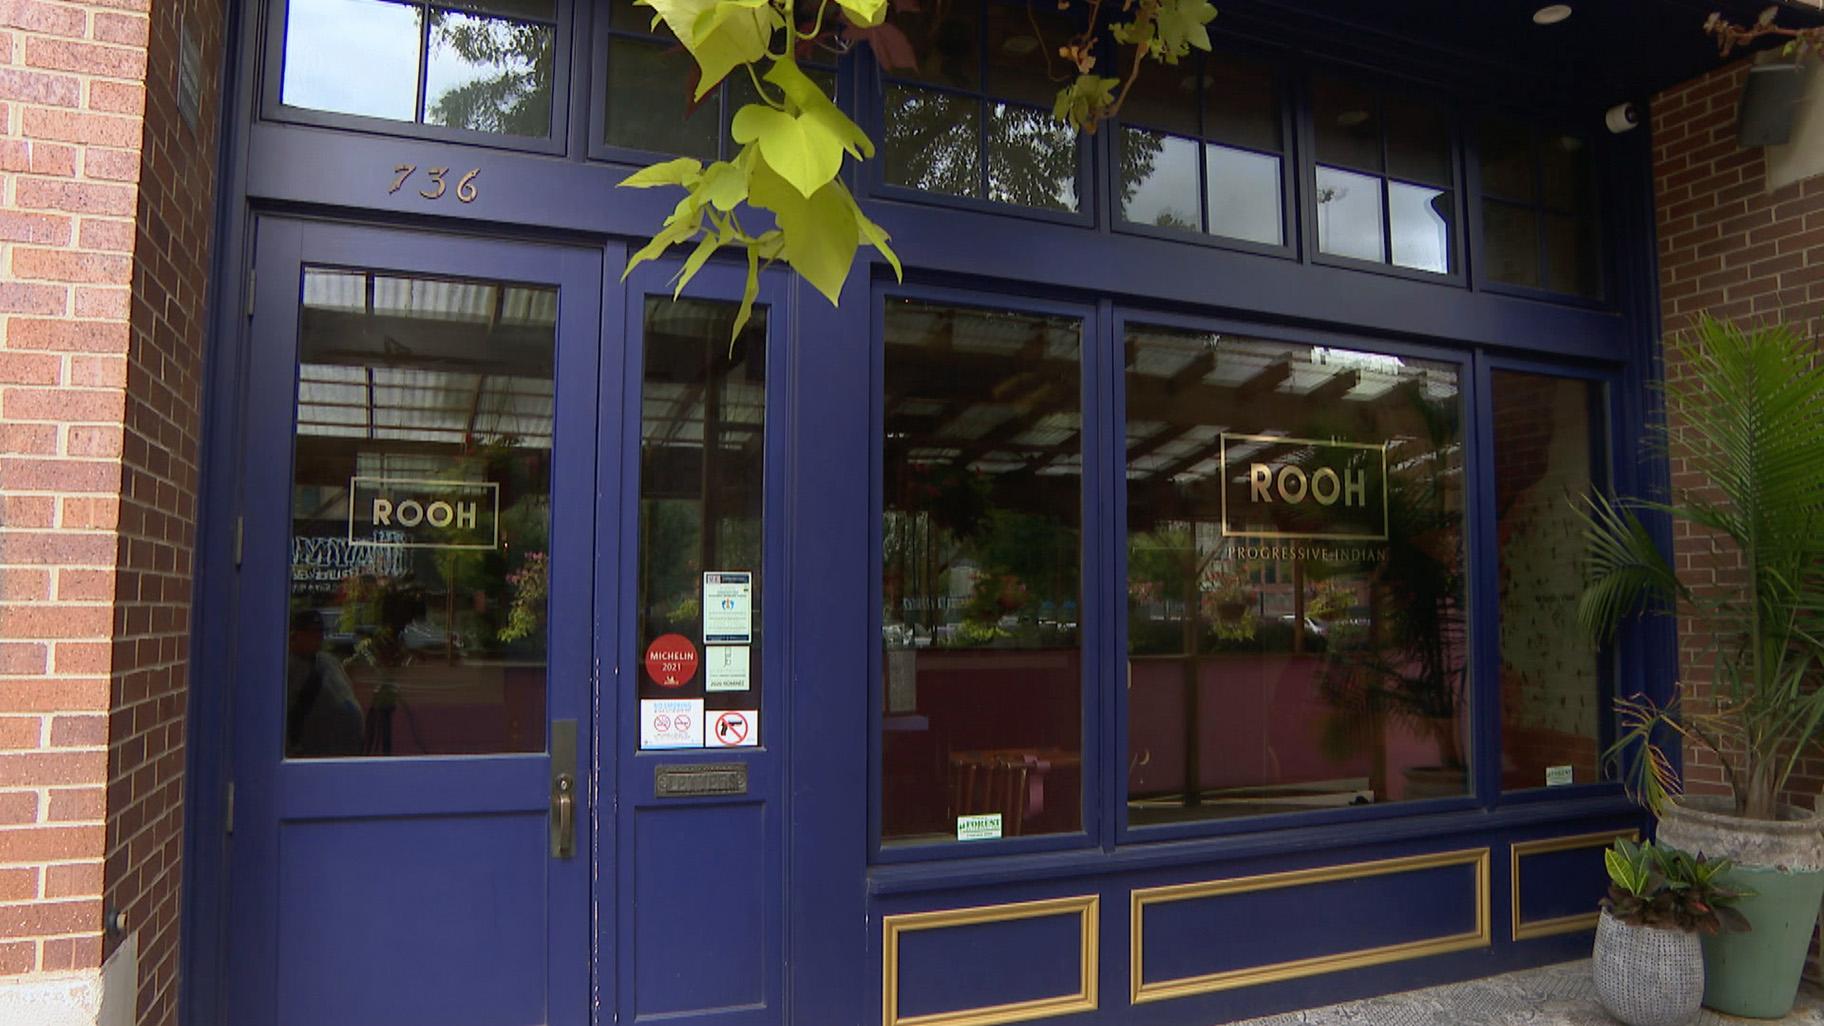 Manish Mallick, who owns progressive Indian restaurant ROOH, says food and supply costs are up 20-30%. But he doesn’t want to have to raise menu prices, which makes day to day cash flow hit or miss – especially in the West Loop. (WTTW News)